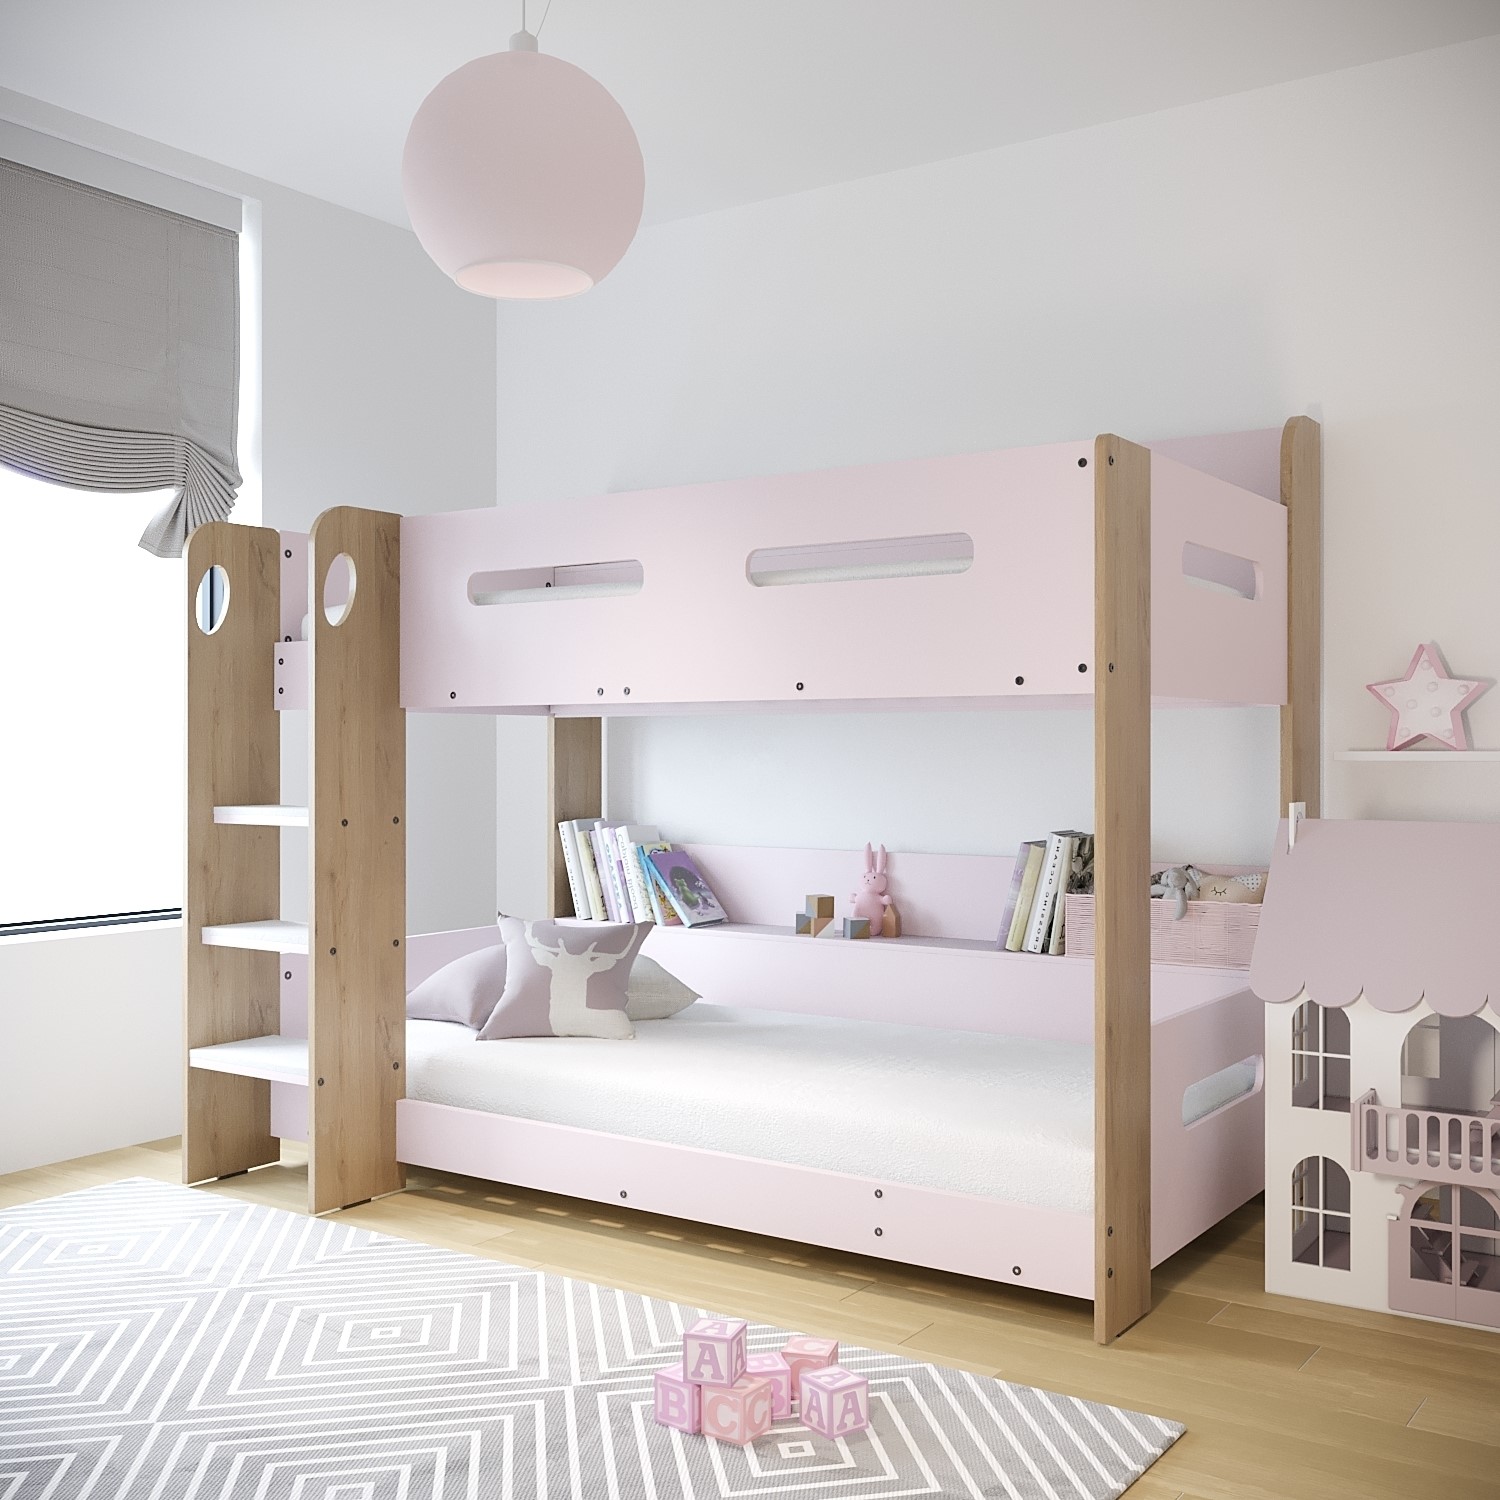 Photo of Pink and oak bunk bed with shelves - sky